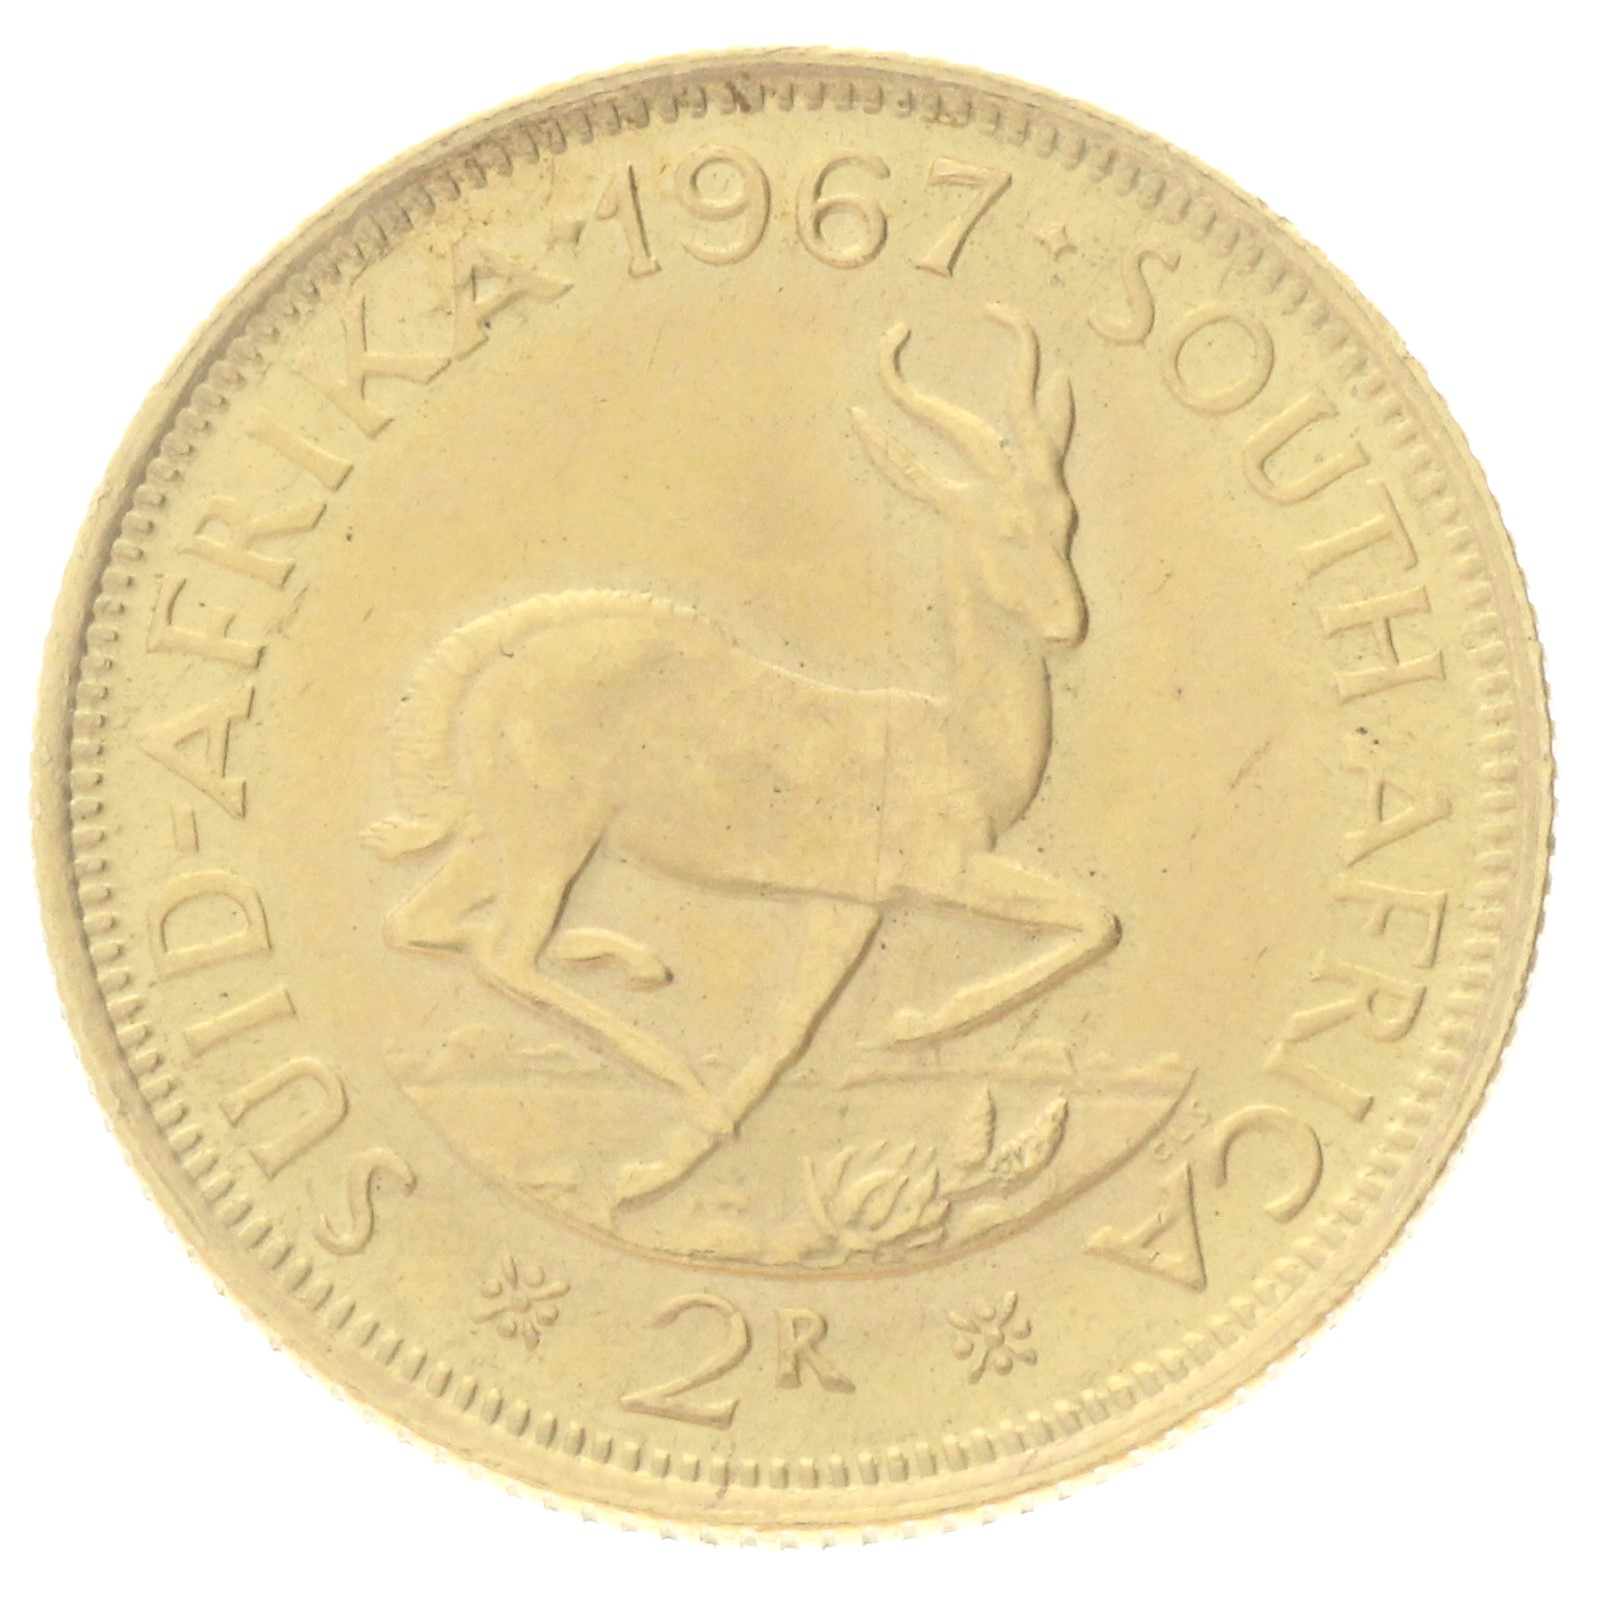 South Africa - 2 rand - 1967